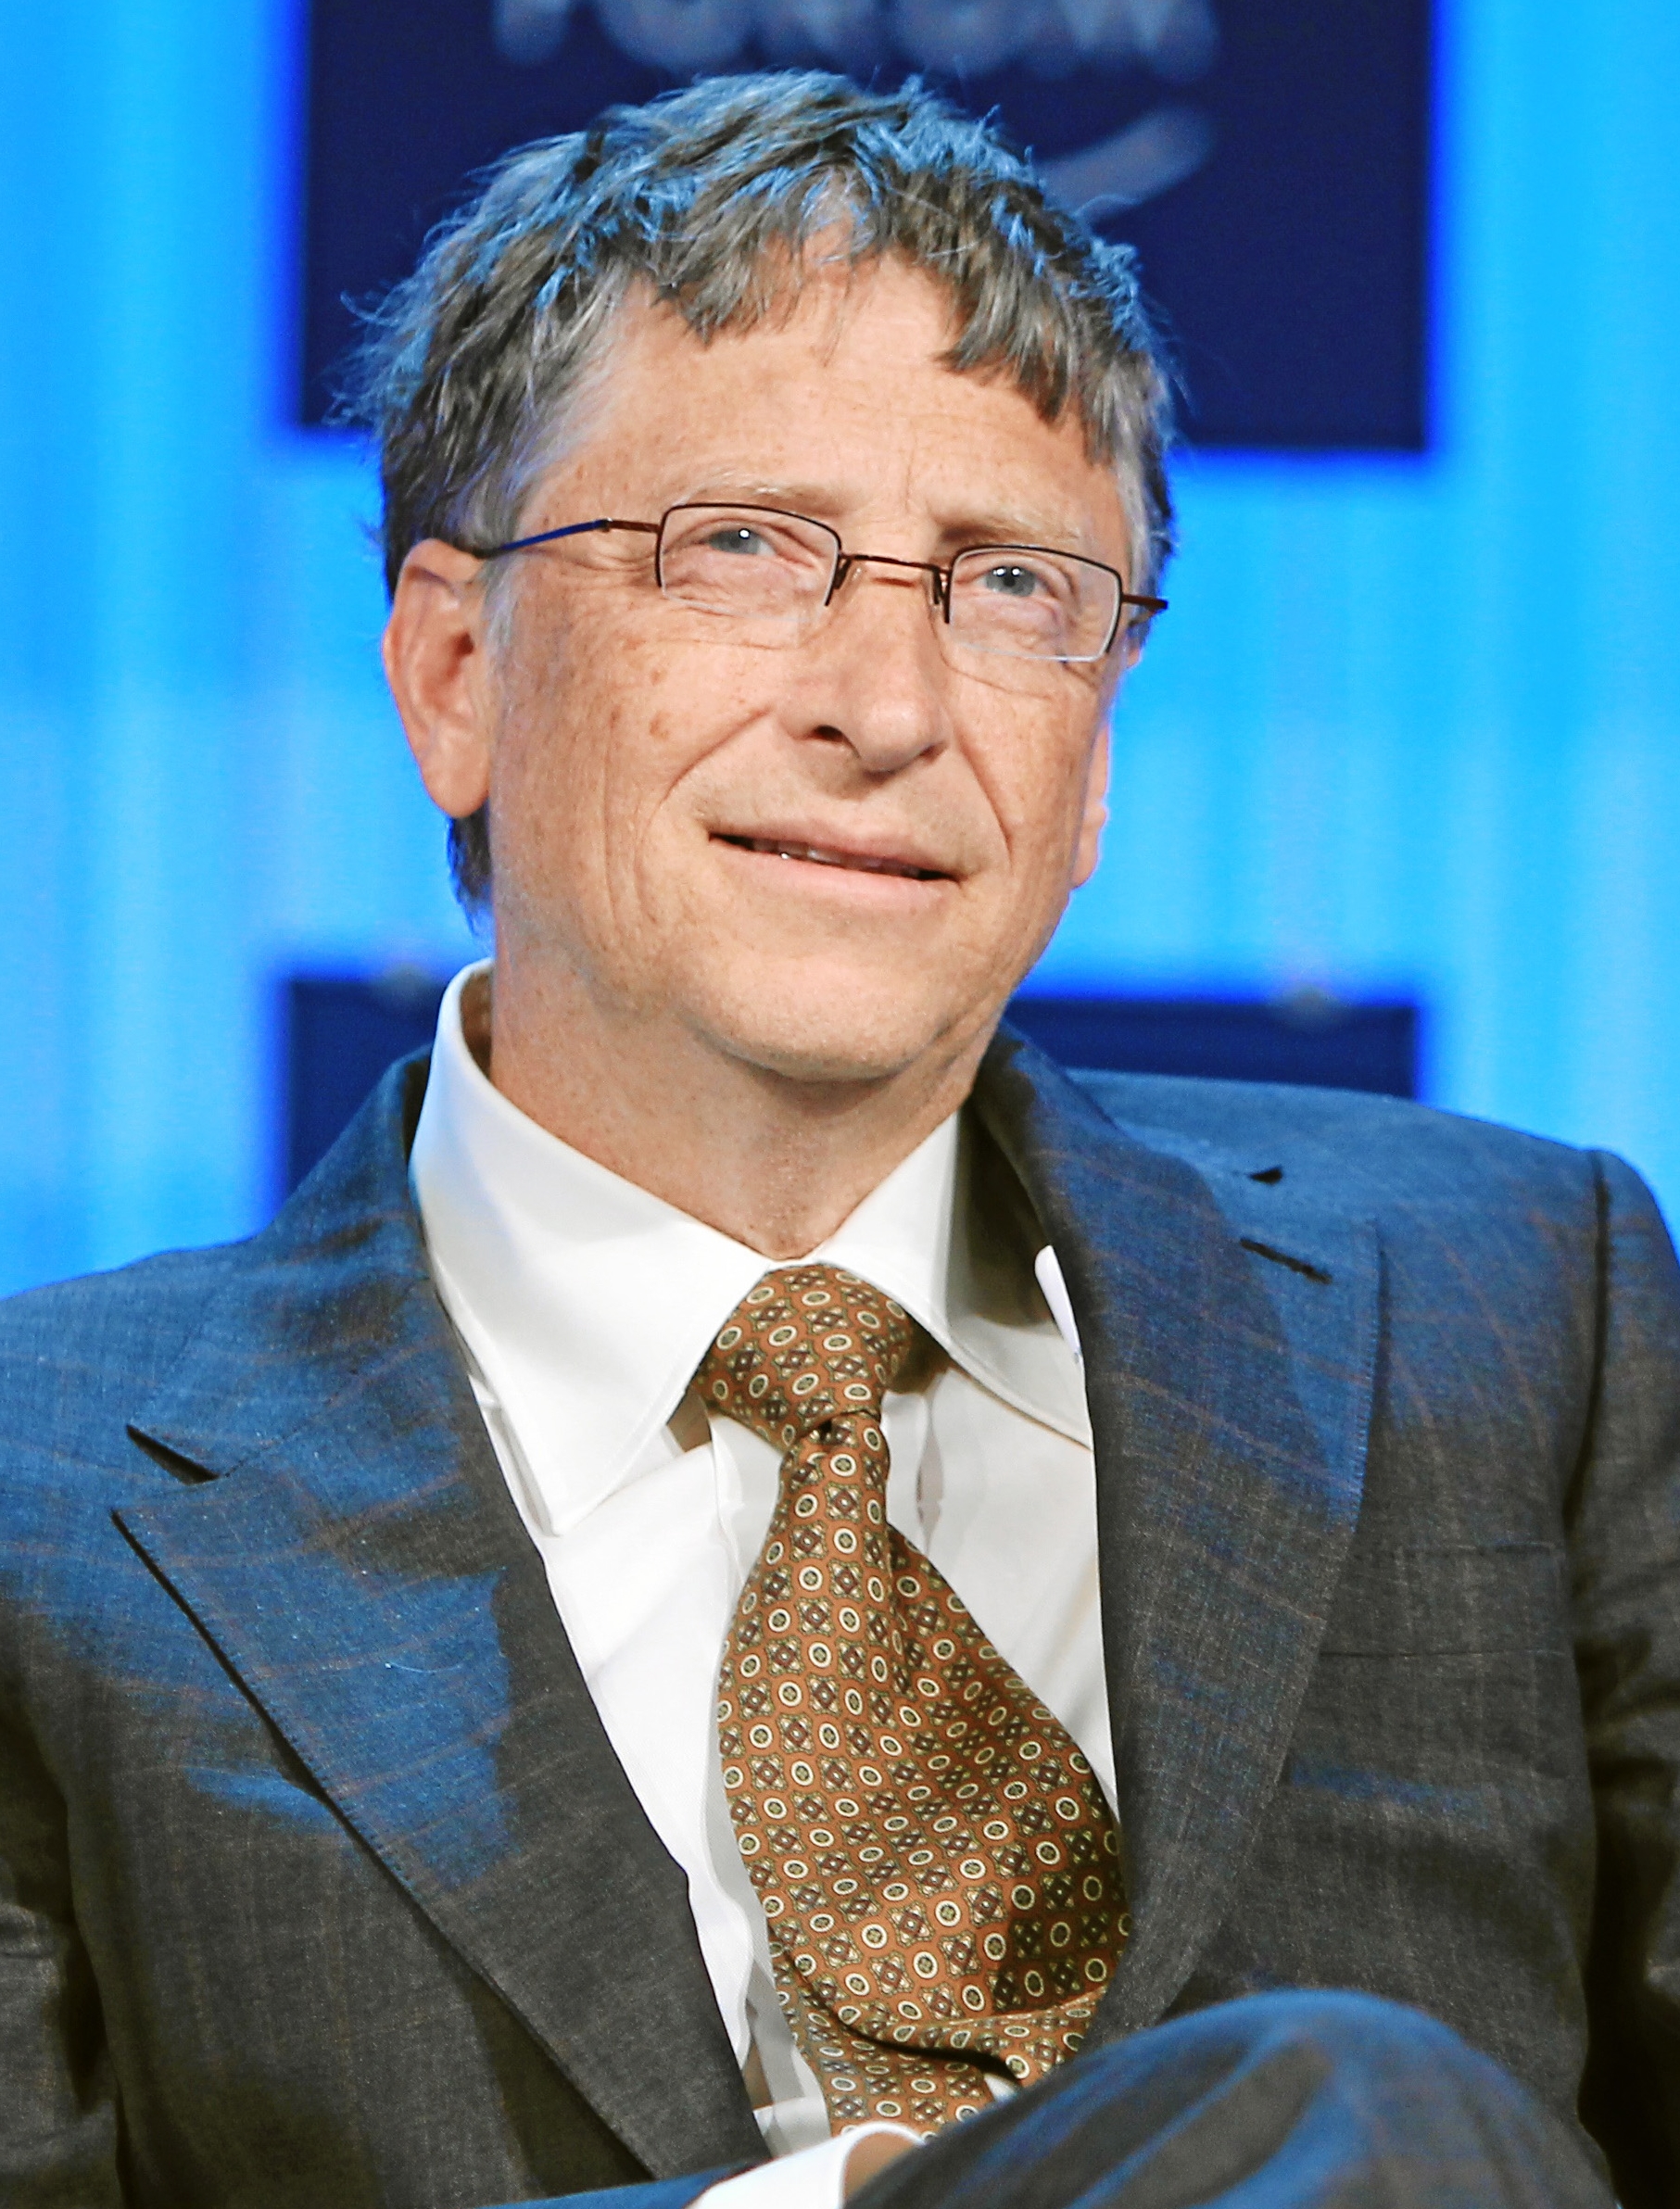 Bill Gates rose from failure to fame and success like these other celebrities